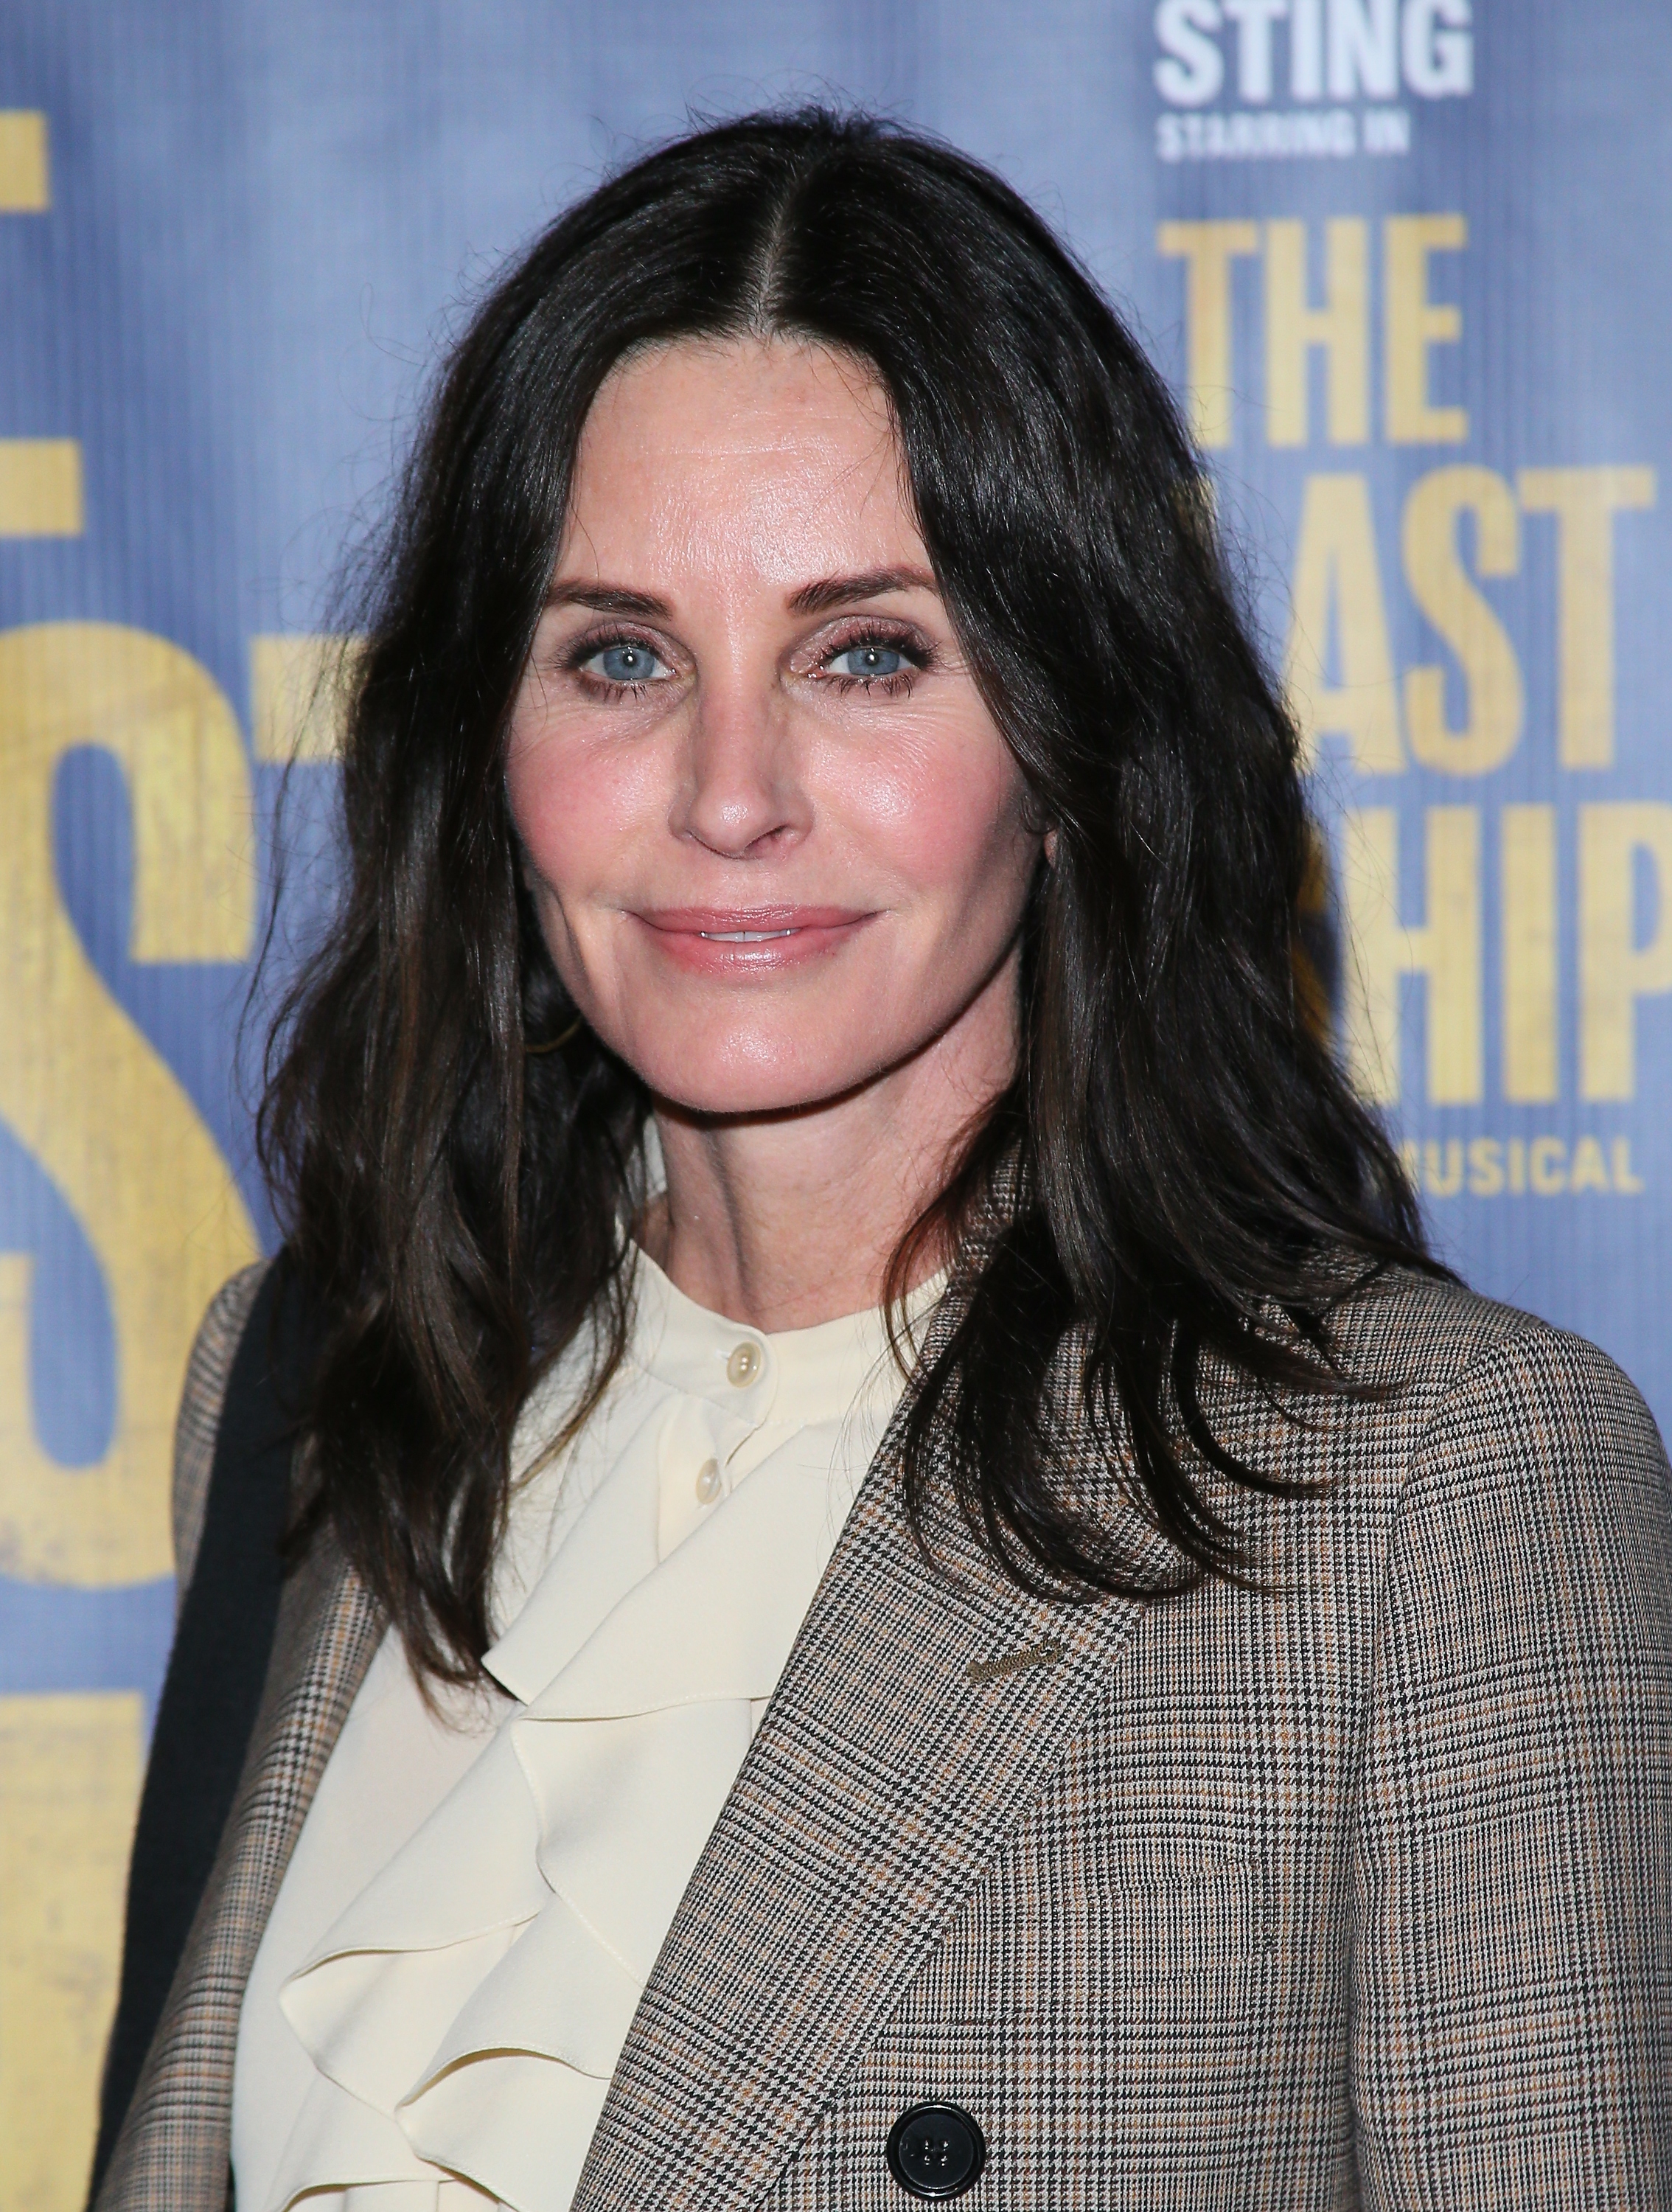 Courteney Cox attends “The Last Ship” Opening Night Performance in Los Angeles, California on January 22, 2020. | Source: Getty Images